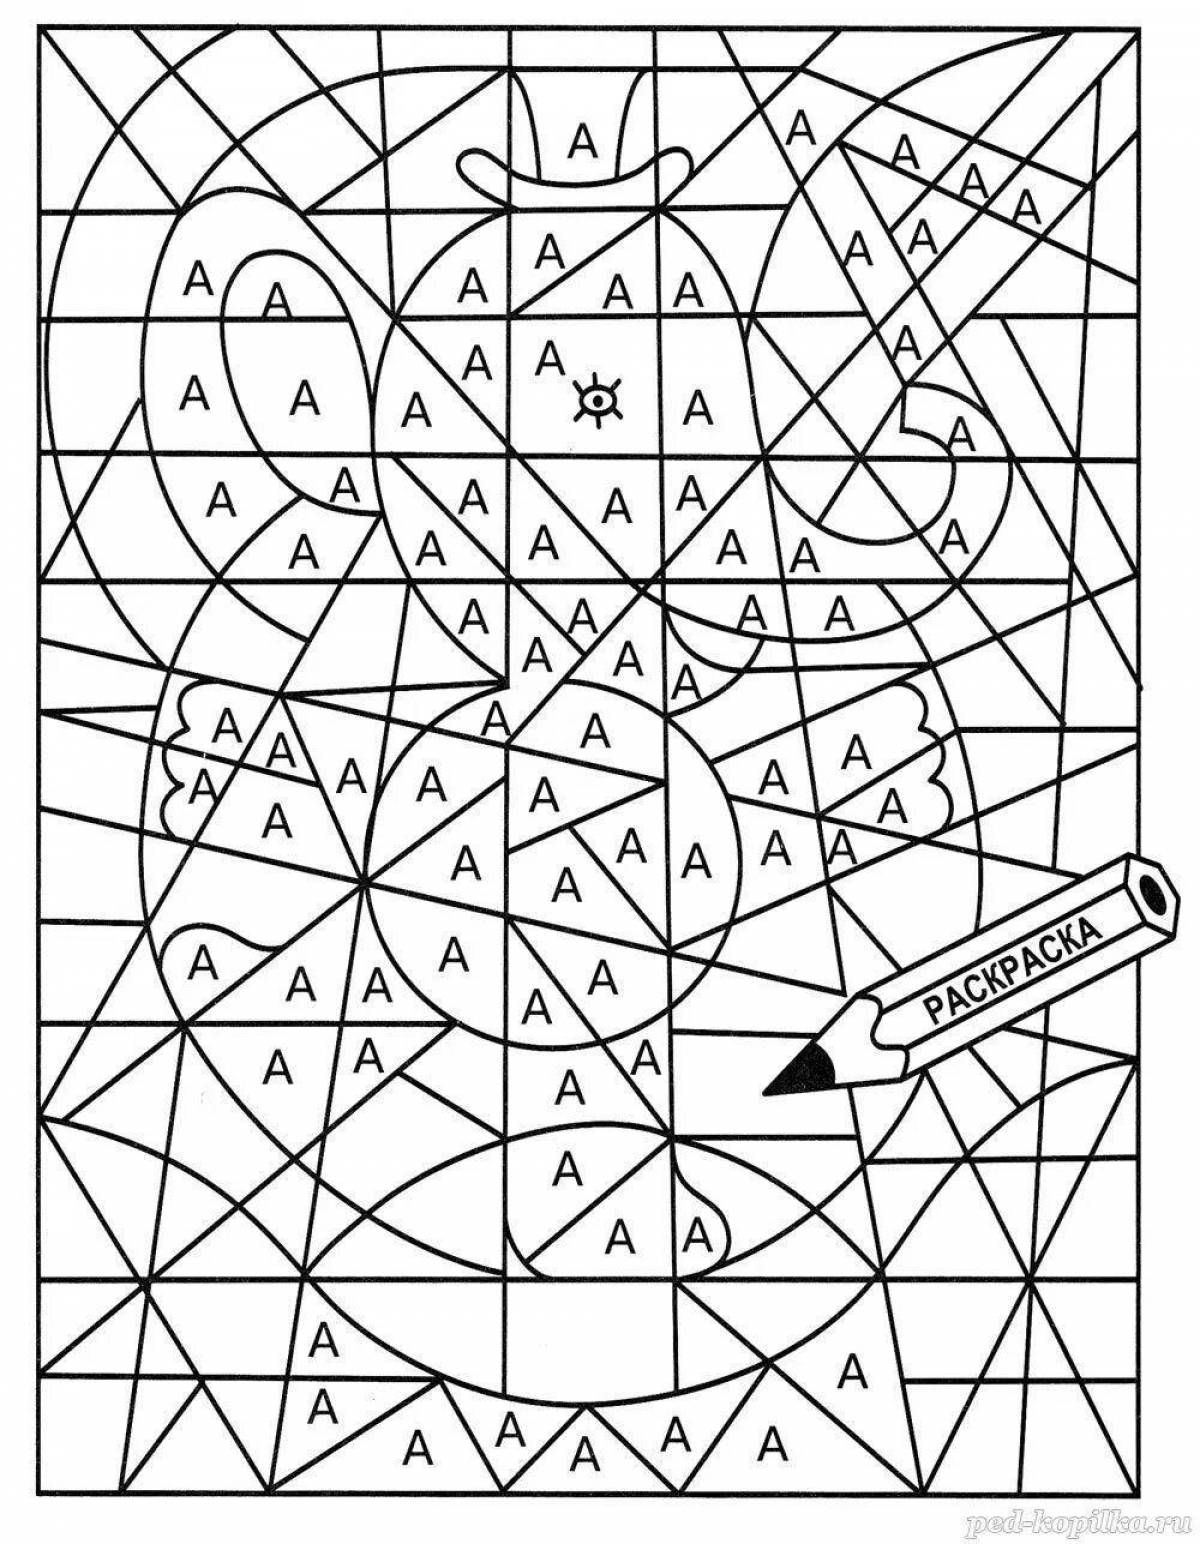 Intriguing coloring game by cells and numbers